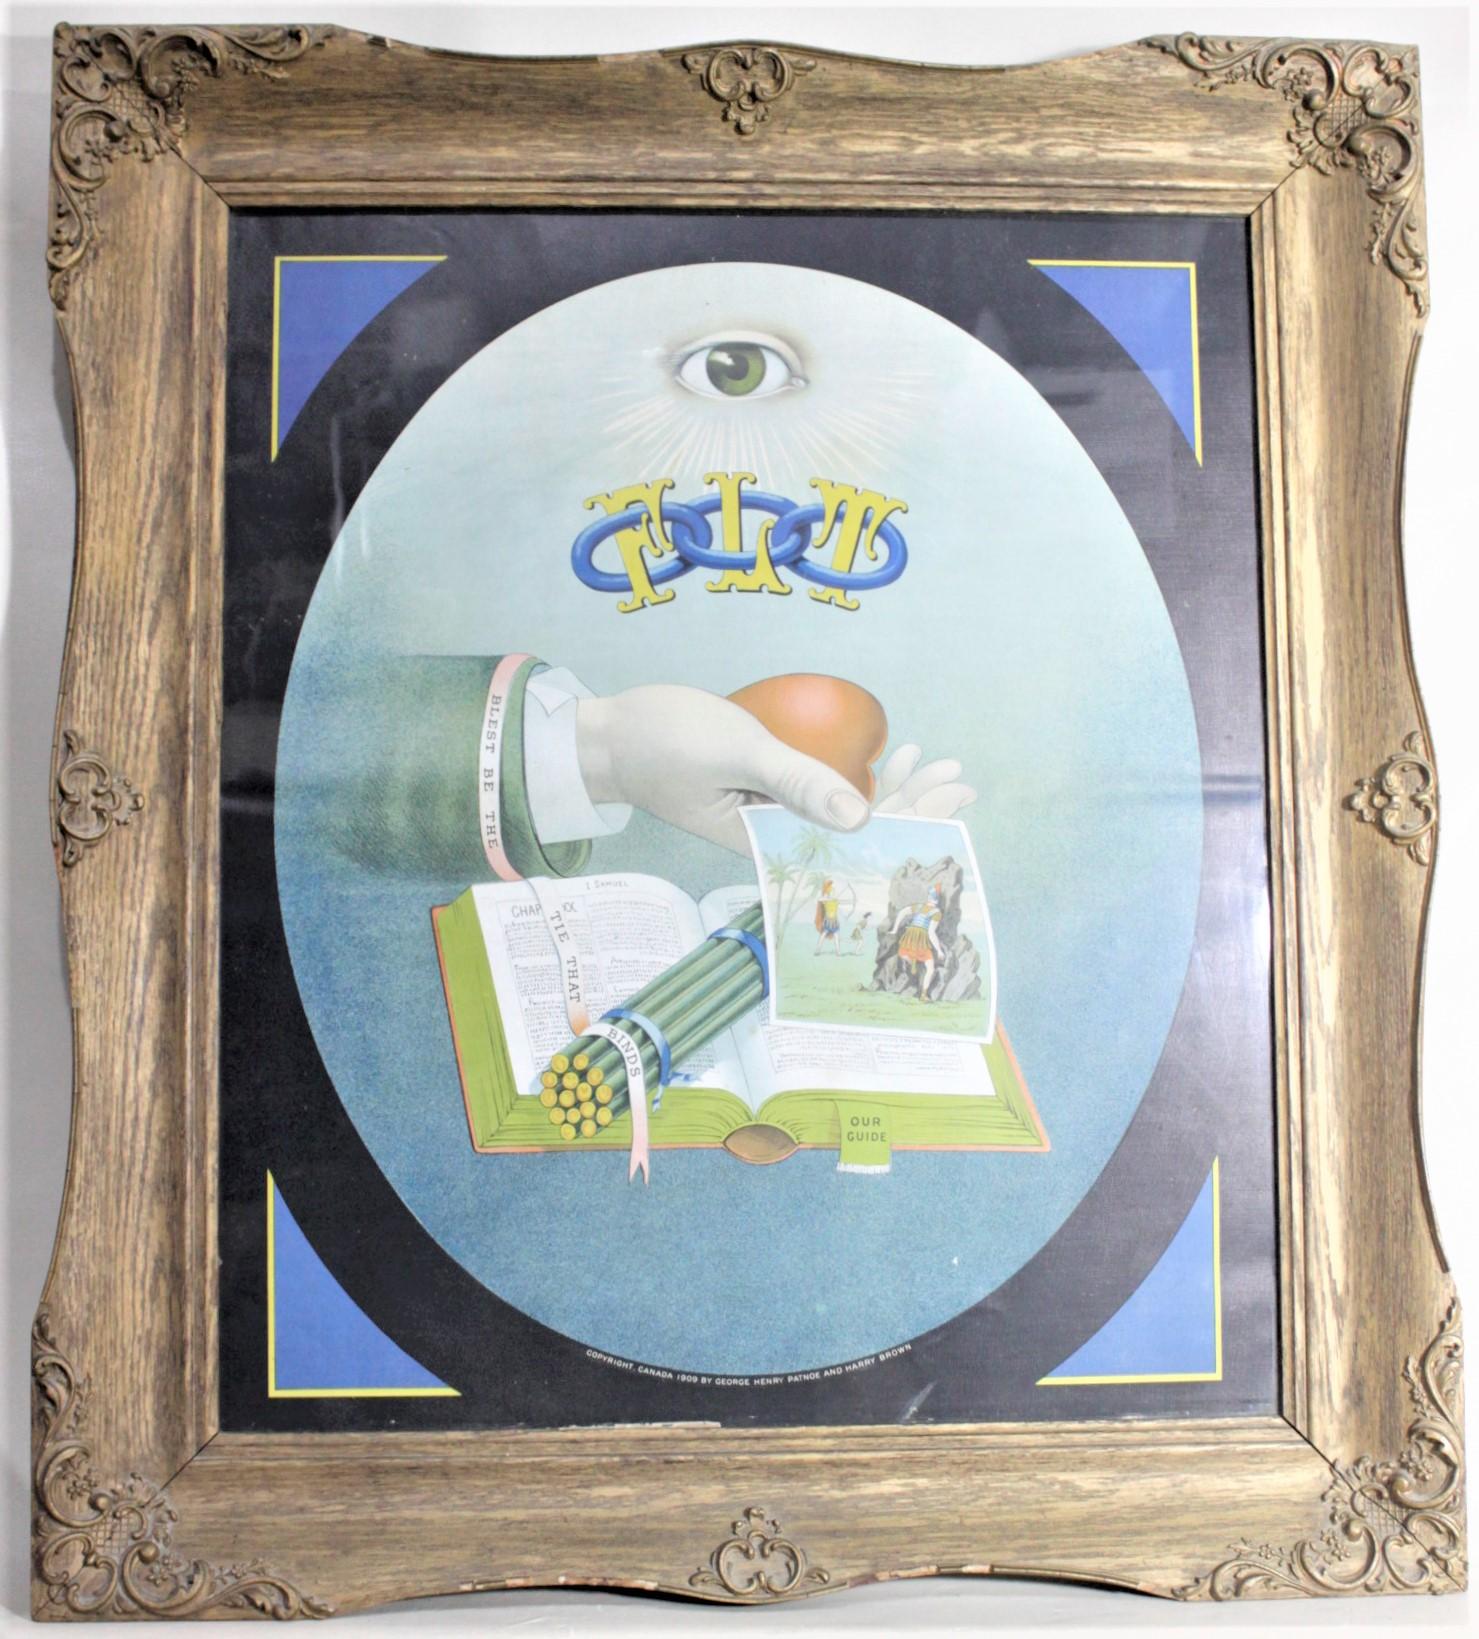 North American Antique Large Framed Masonic or Oddfellows Decorative Lodge Print For Sale